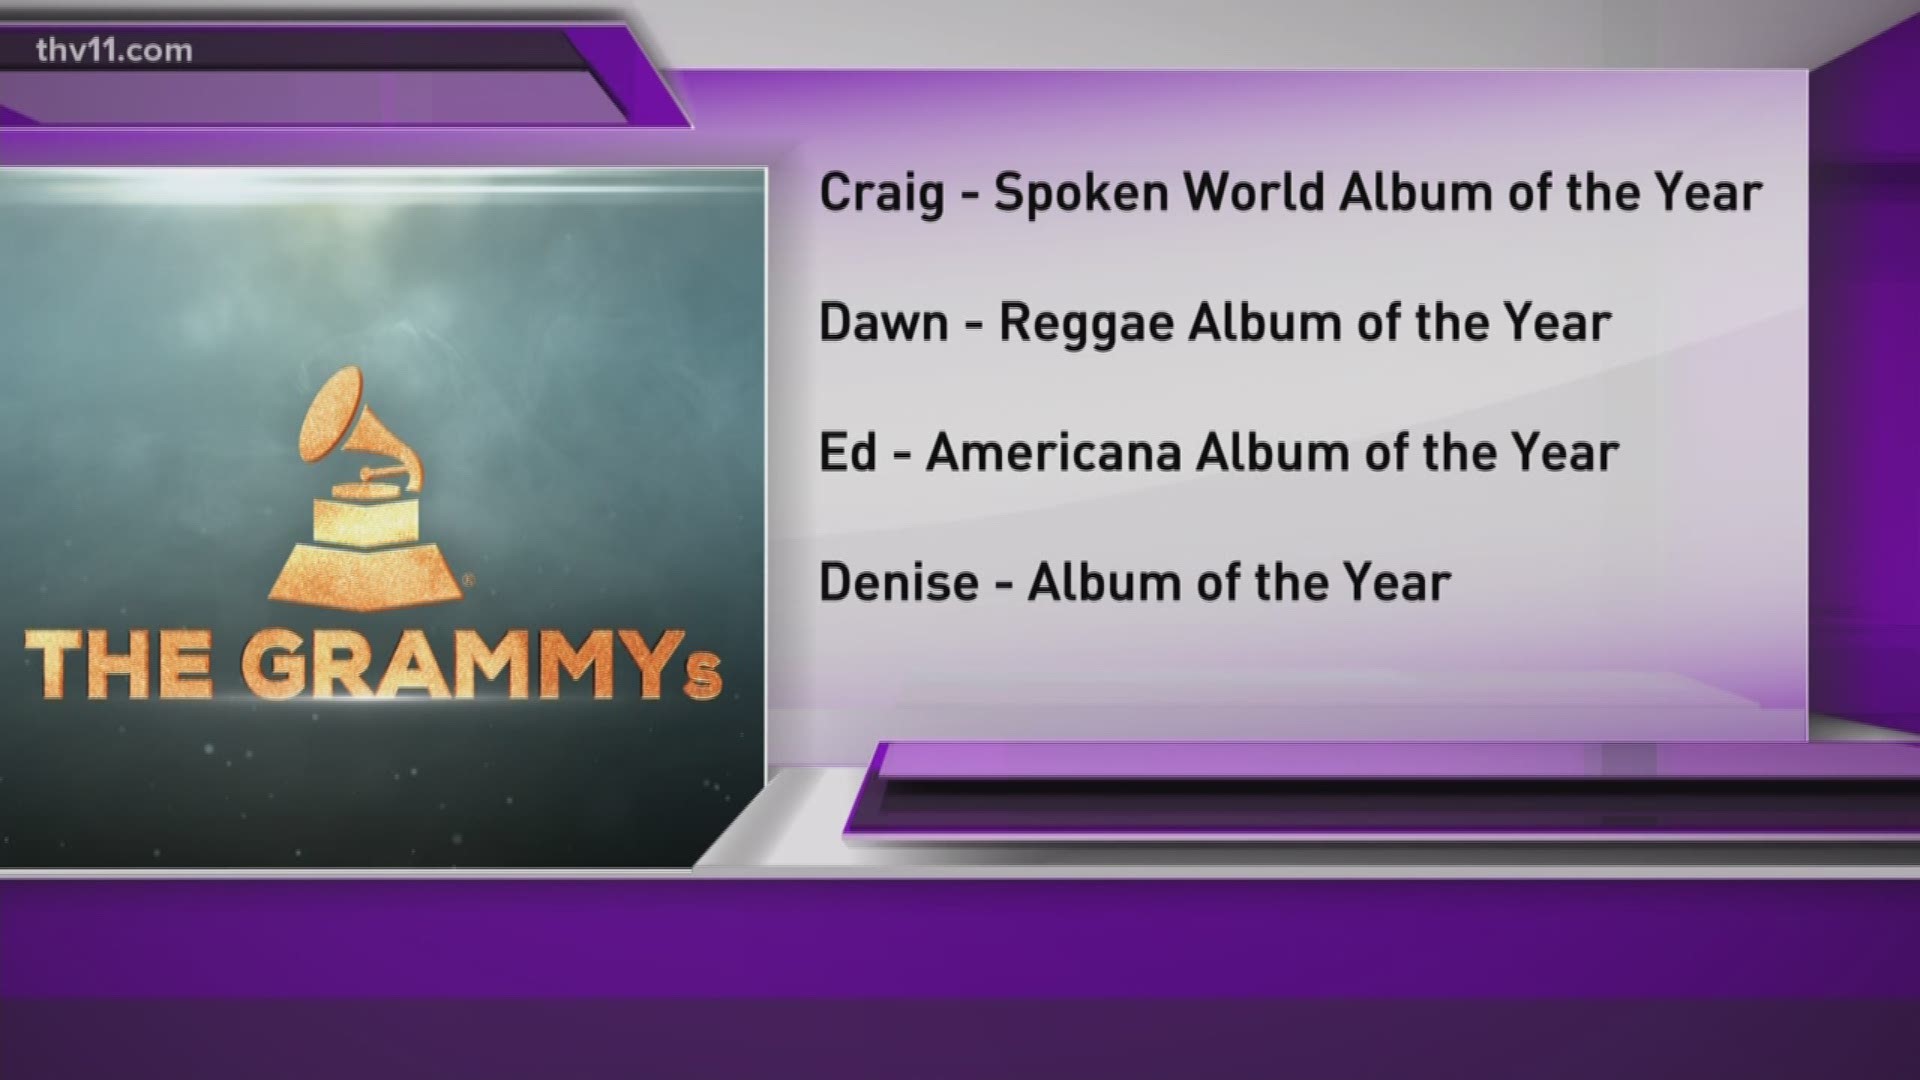 The anchors and Ed picked what category they would contend in at The GRAMMYs.